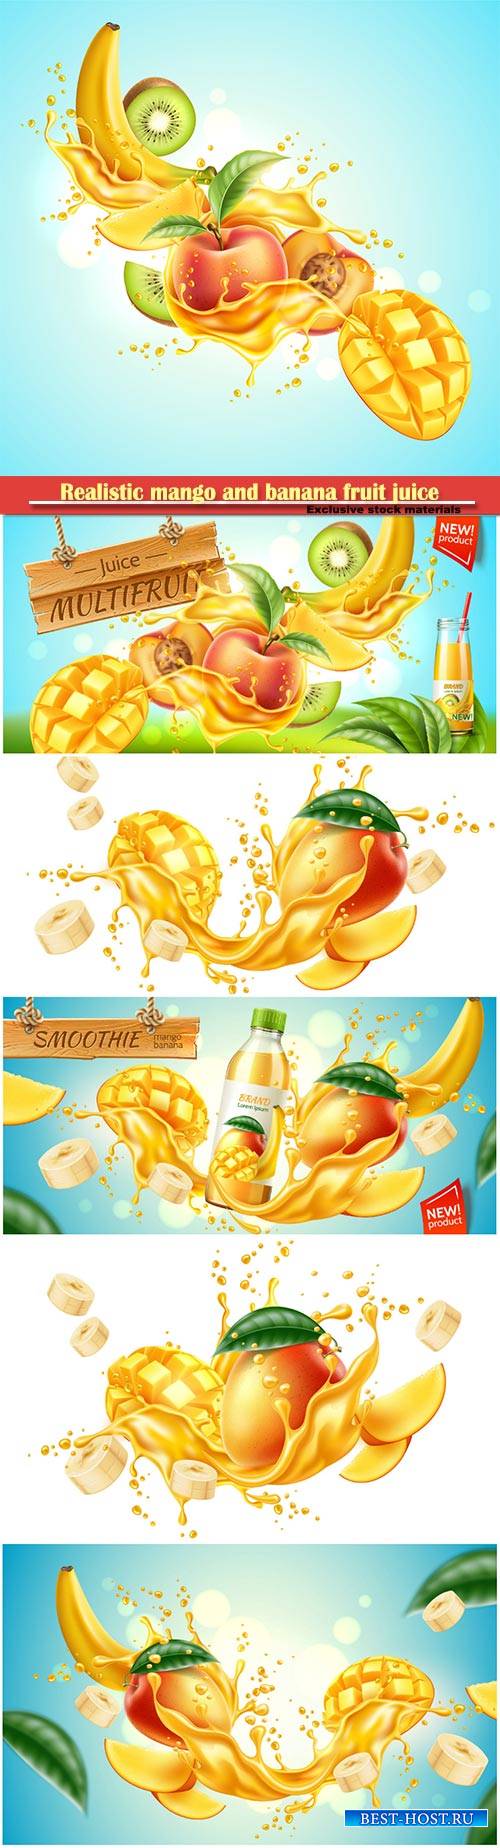 Realistic mango and banana fruit juice advertising , vector product package ...